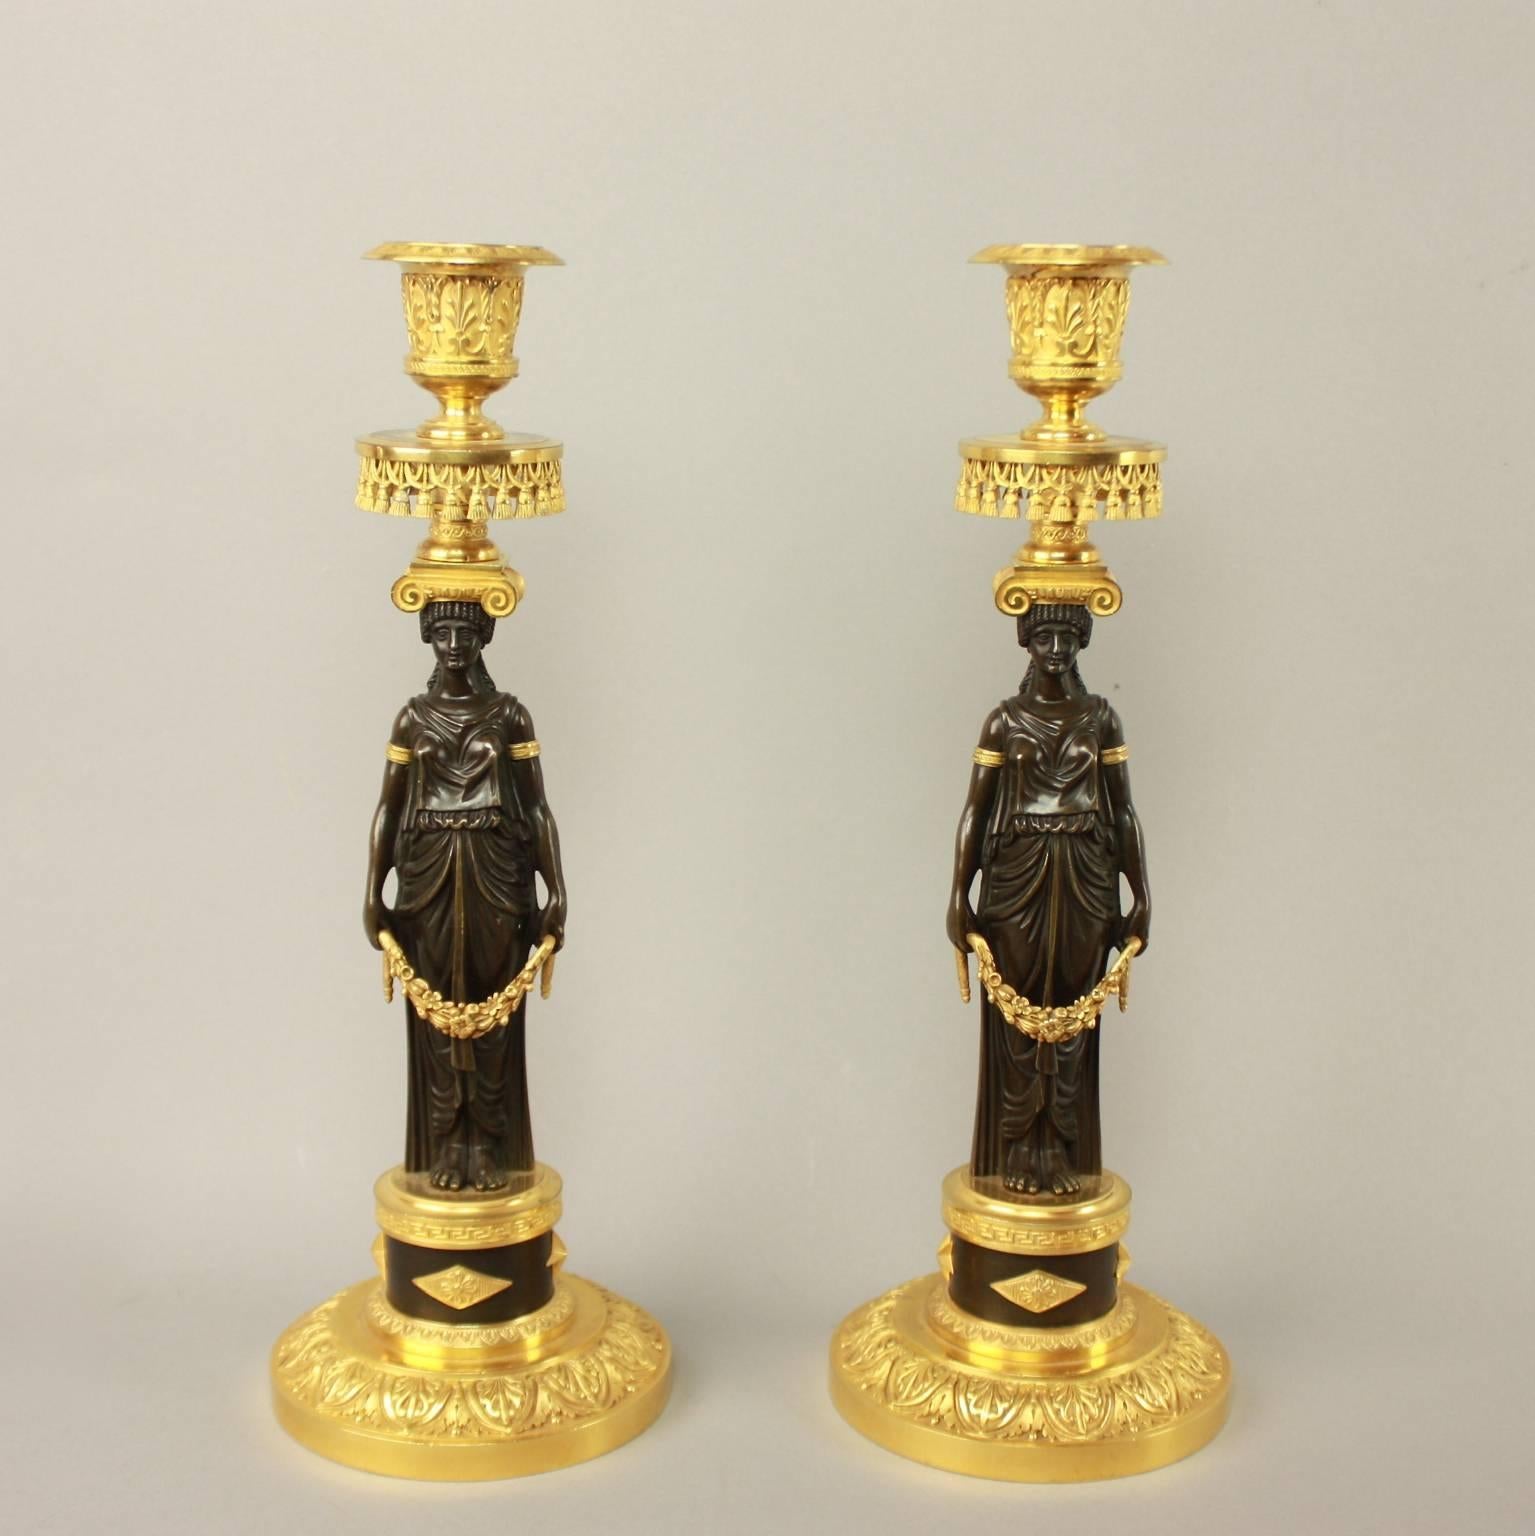 A fine pair of ormolu and patinated bronze candlesticks, each with a caryatid vestal virgin (ancient priestesses who protected the temple dedicated to the Roman goddess Vesta) or possible korai (female figures used as votive offerings to deities,